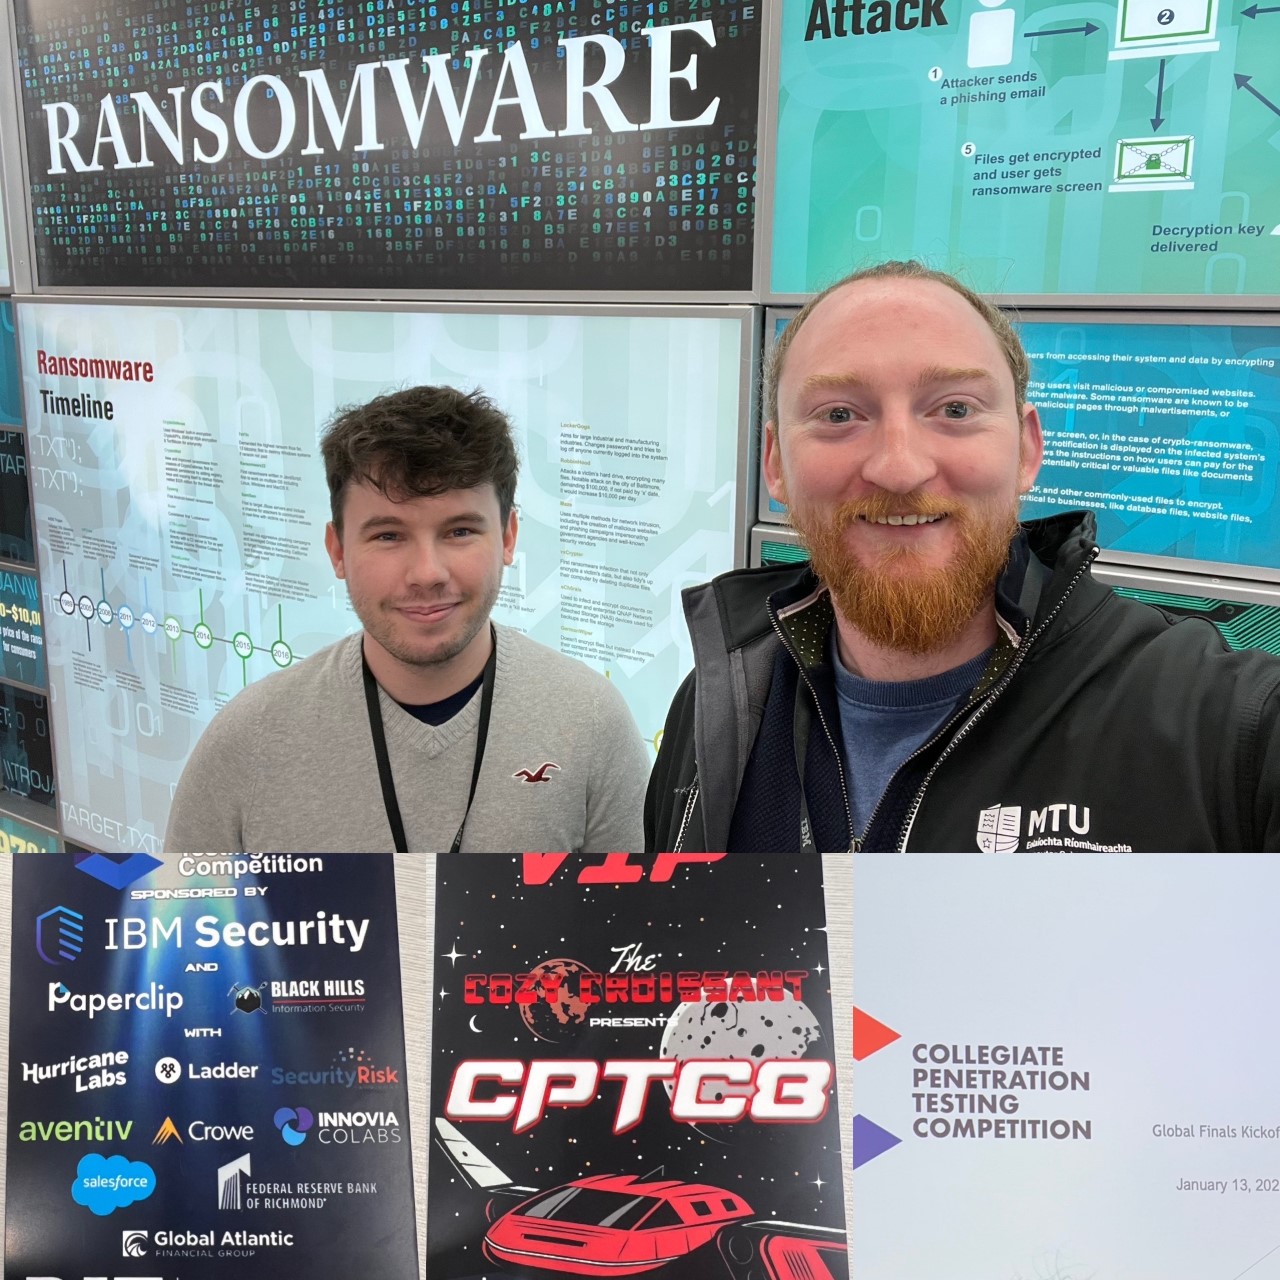 State-of-the-Art Cyber Security Competitions and Penetration Testing at RIT